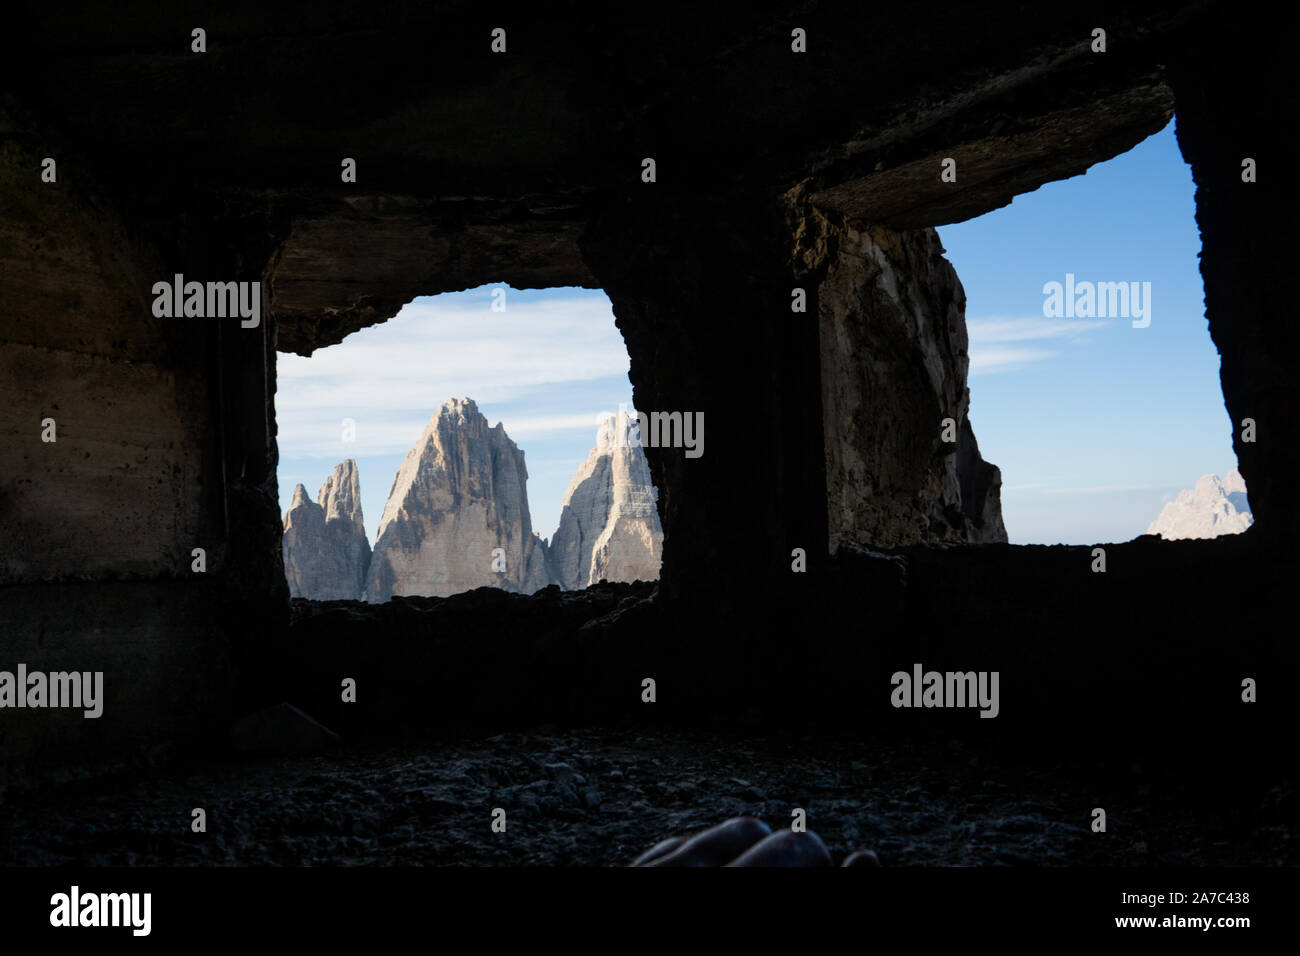 tre cime di (three peaks of) lavaredo peaks as seen from inside a cave where soldiers use to sleep during the second or first world war Stock Photo